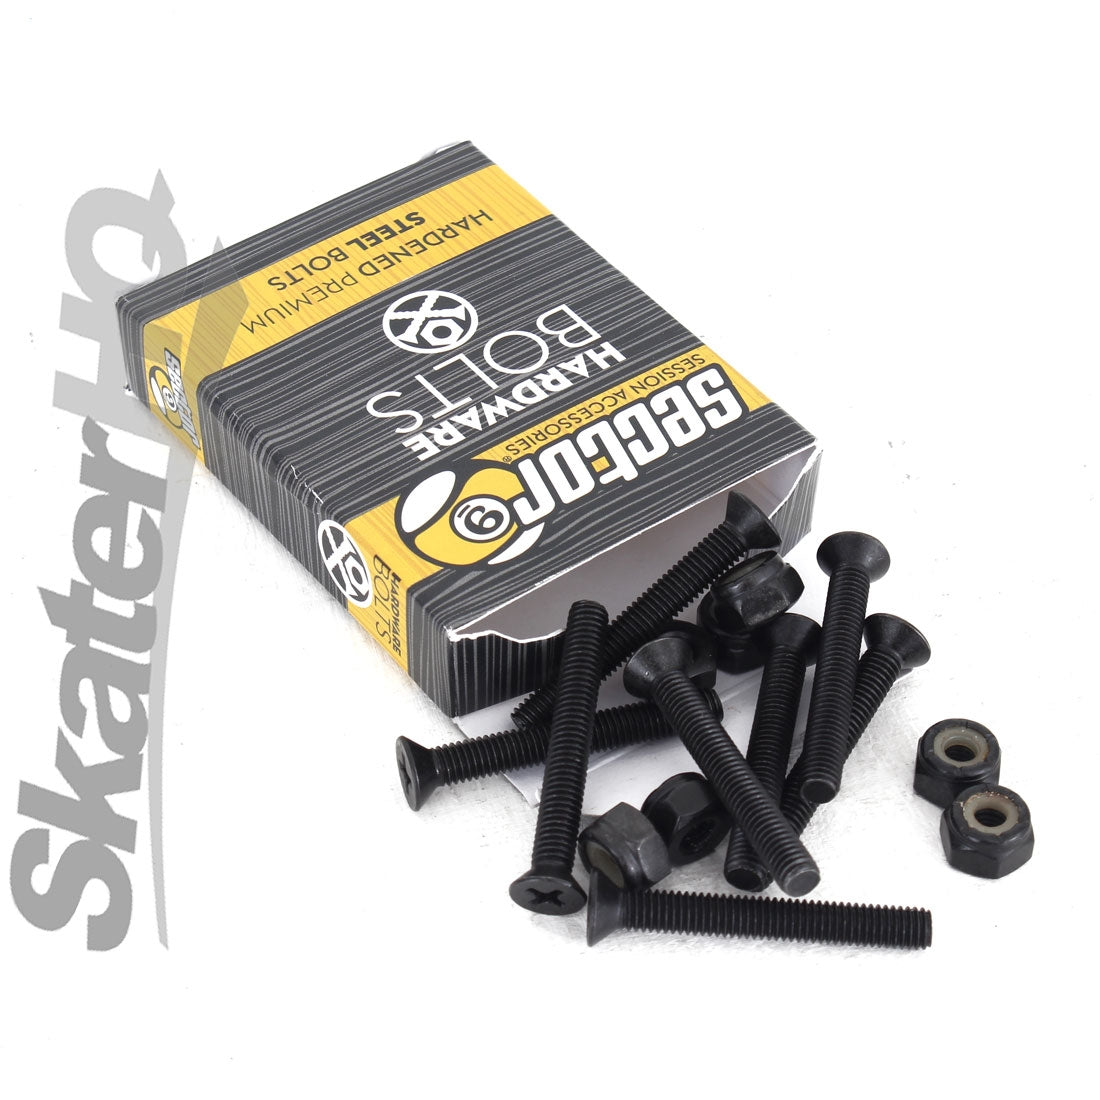 Sector 9 Steel Bolts 1.5inch Phillips 8pk - Black Skateboard Hardware and Parts